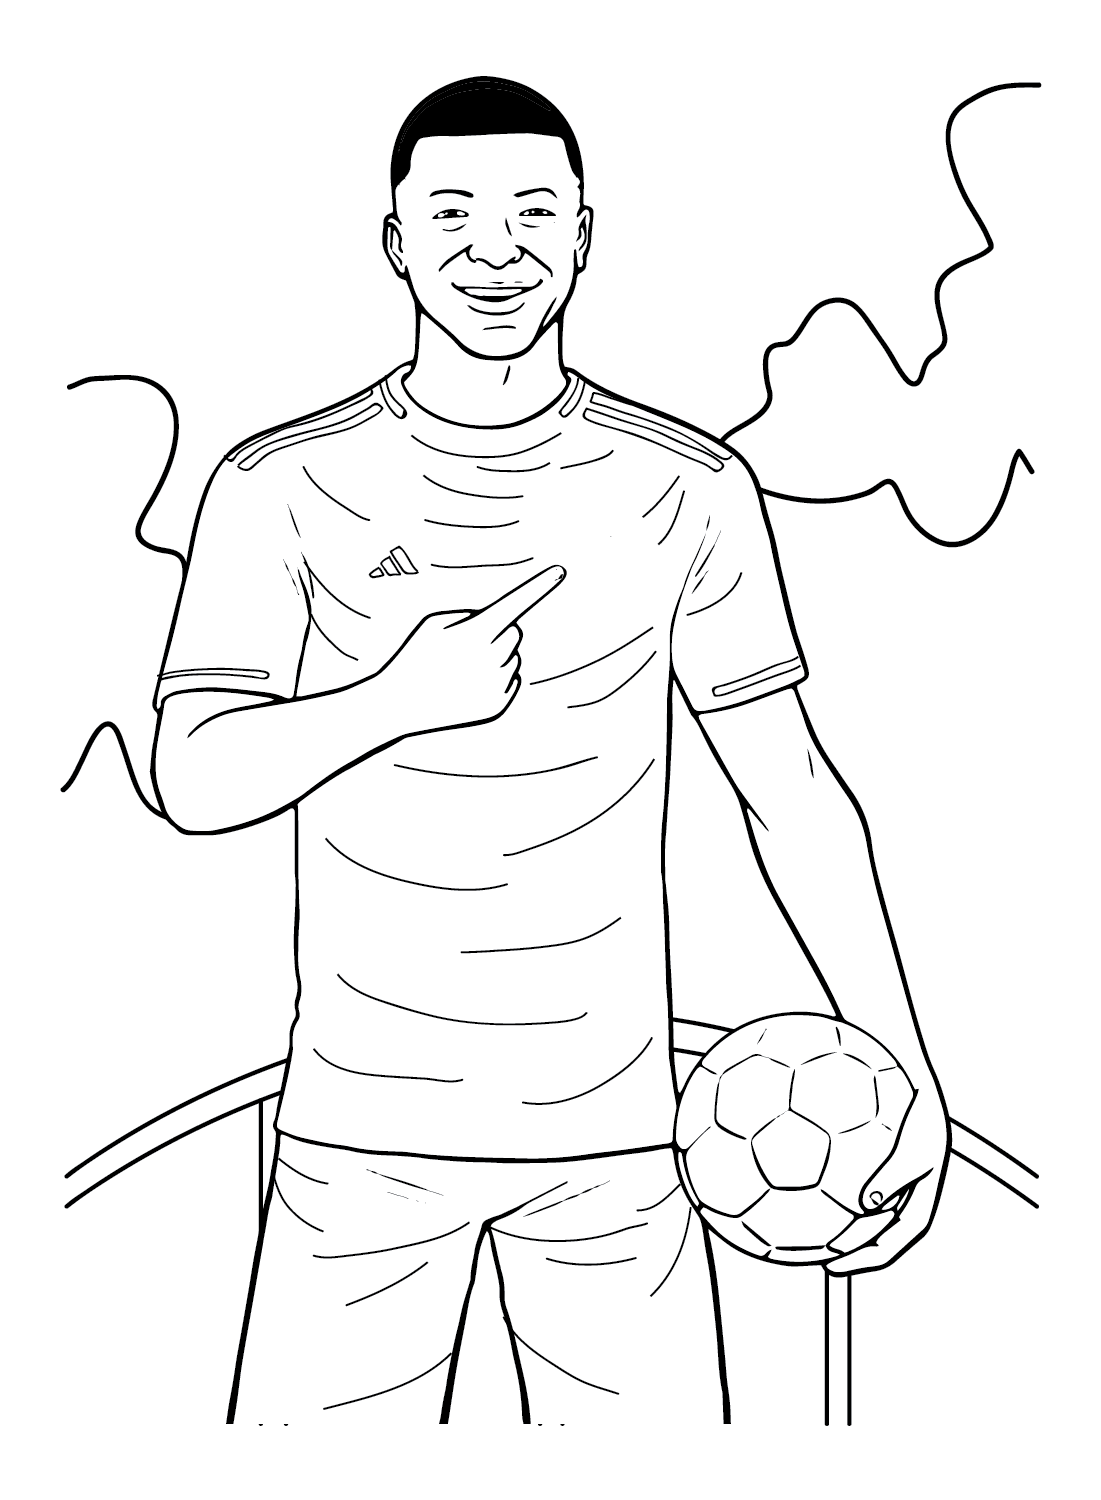 Kylian Mbappé Free Coloring Pages - Kylian Mbappé Coloring Pages - Coloring  Pages For Kids And Adults